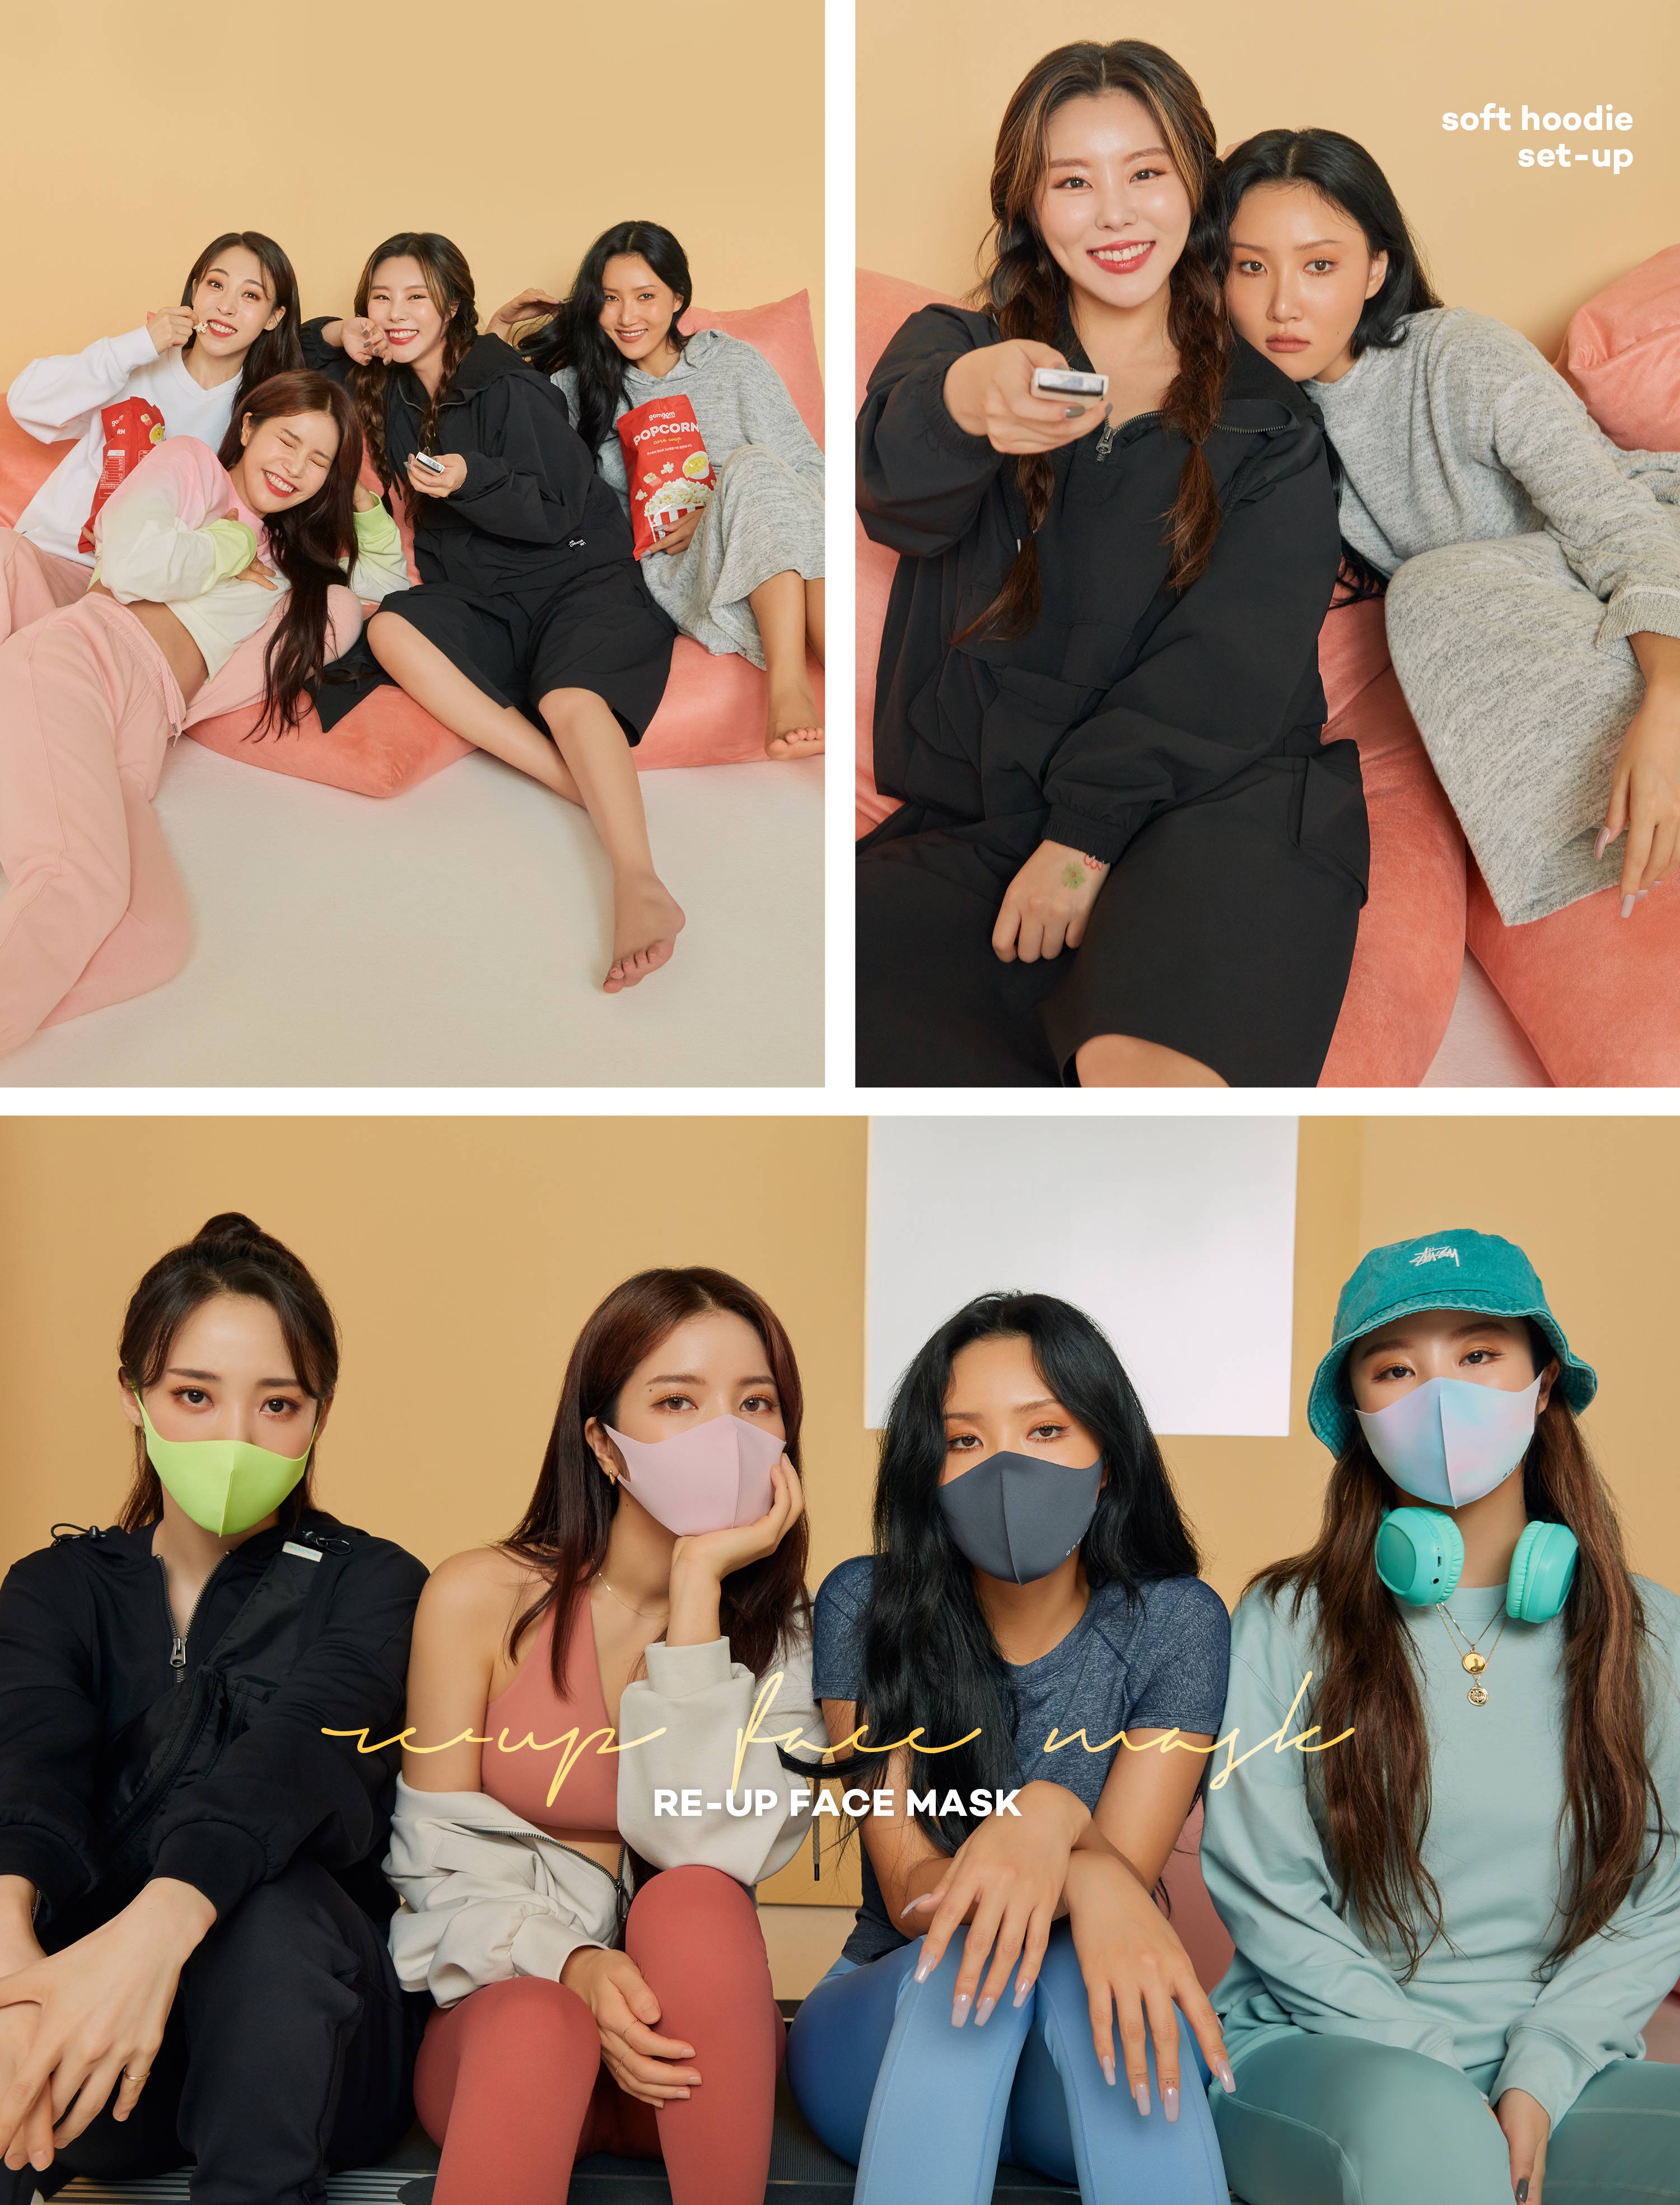 COLORFUL UNTACT - MAMAMOO with andar signature